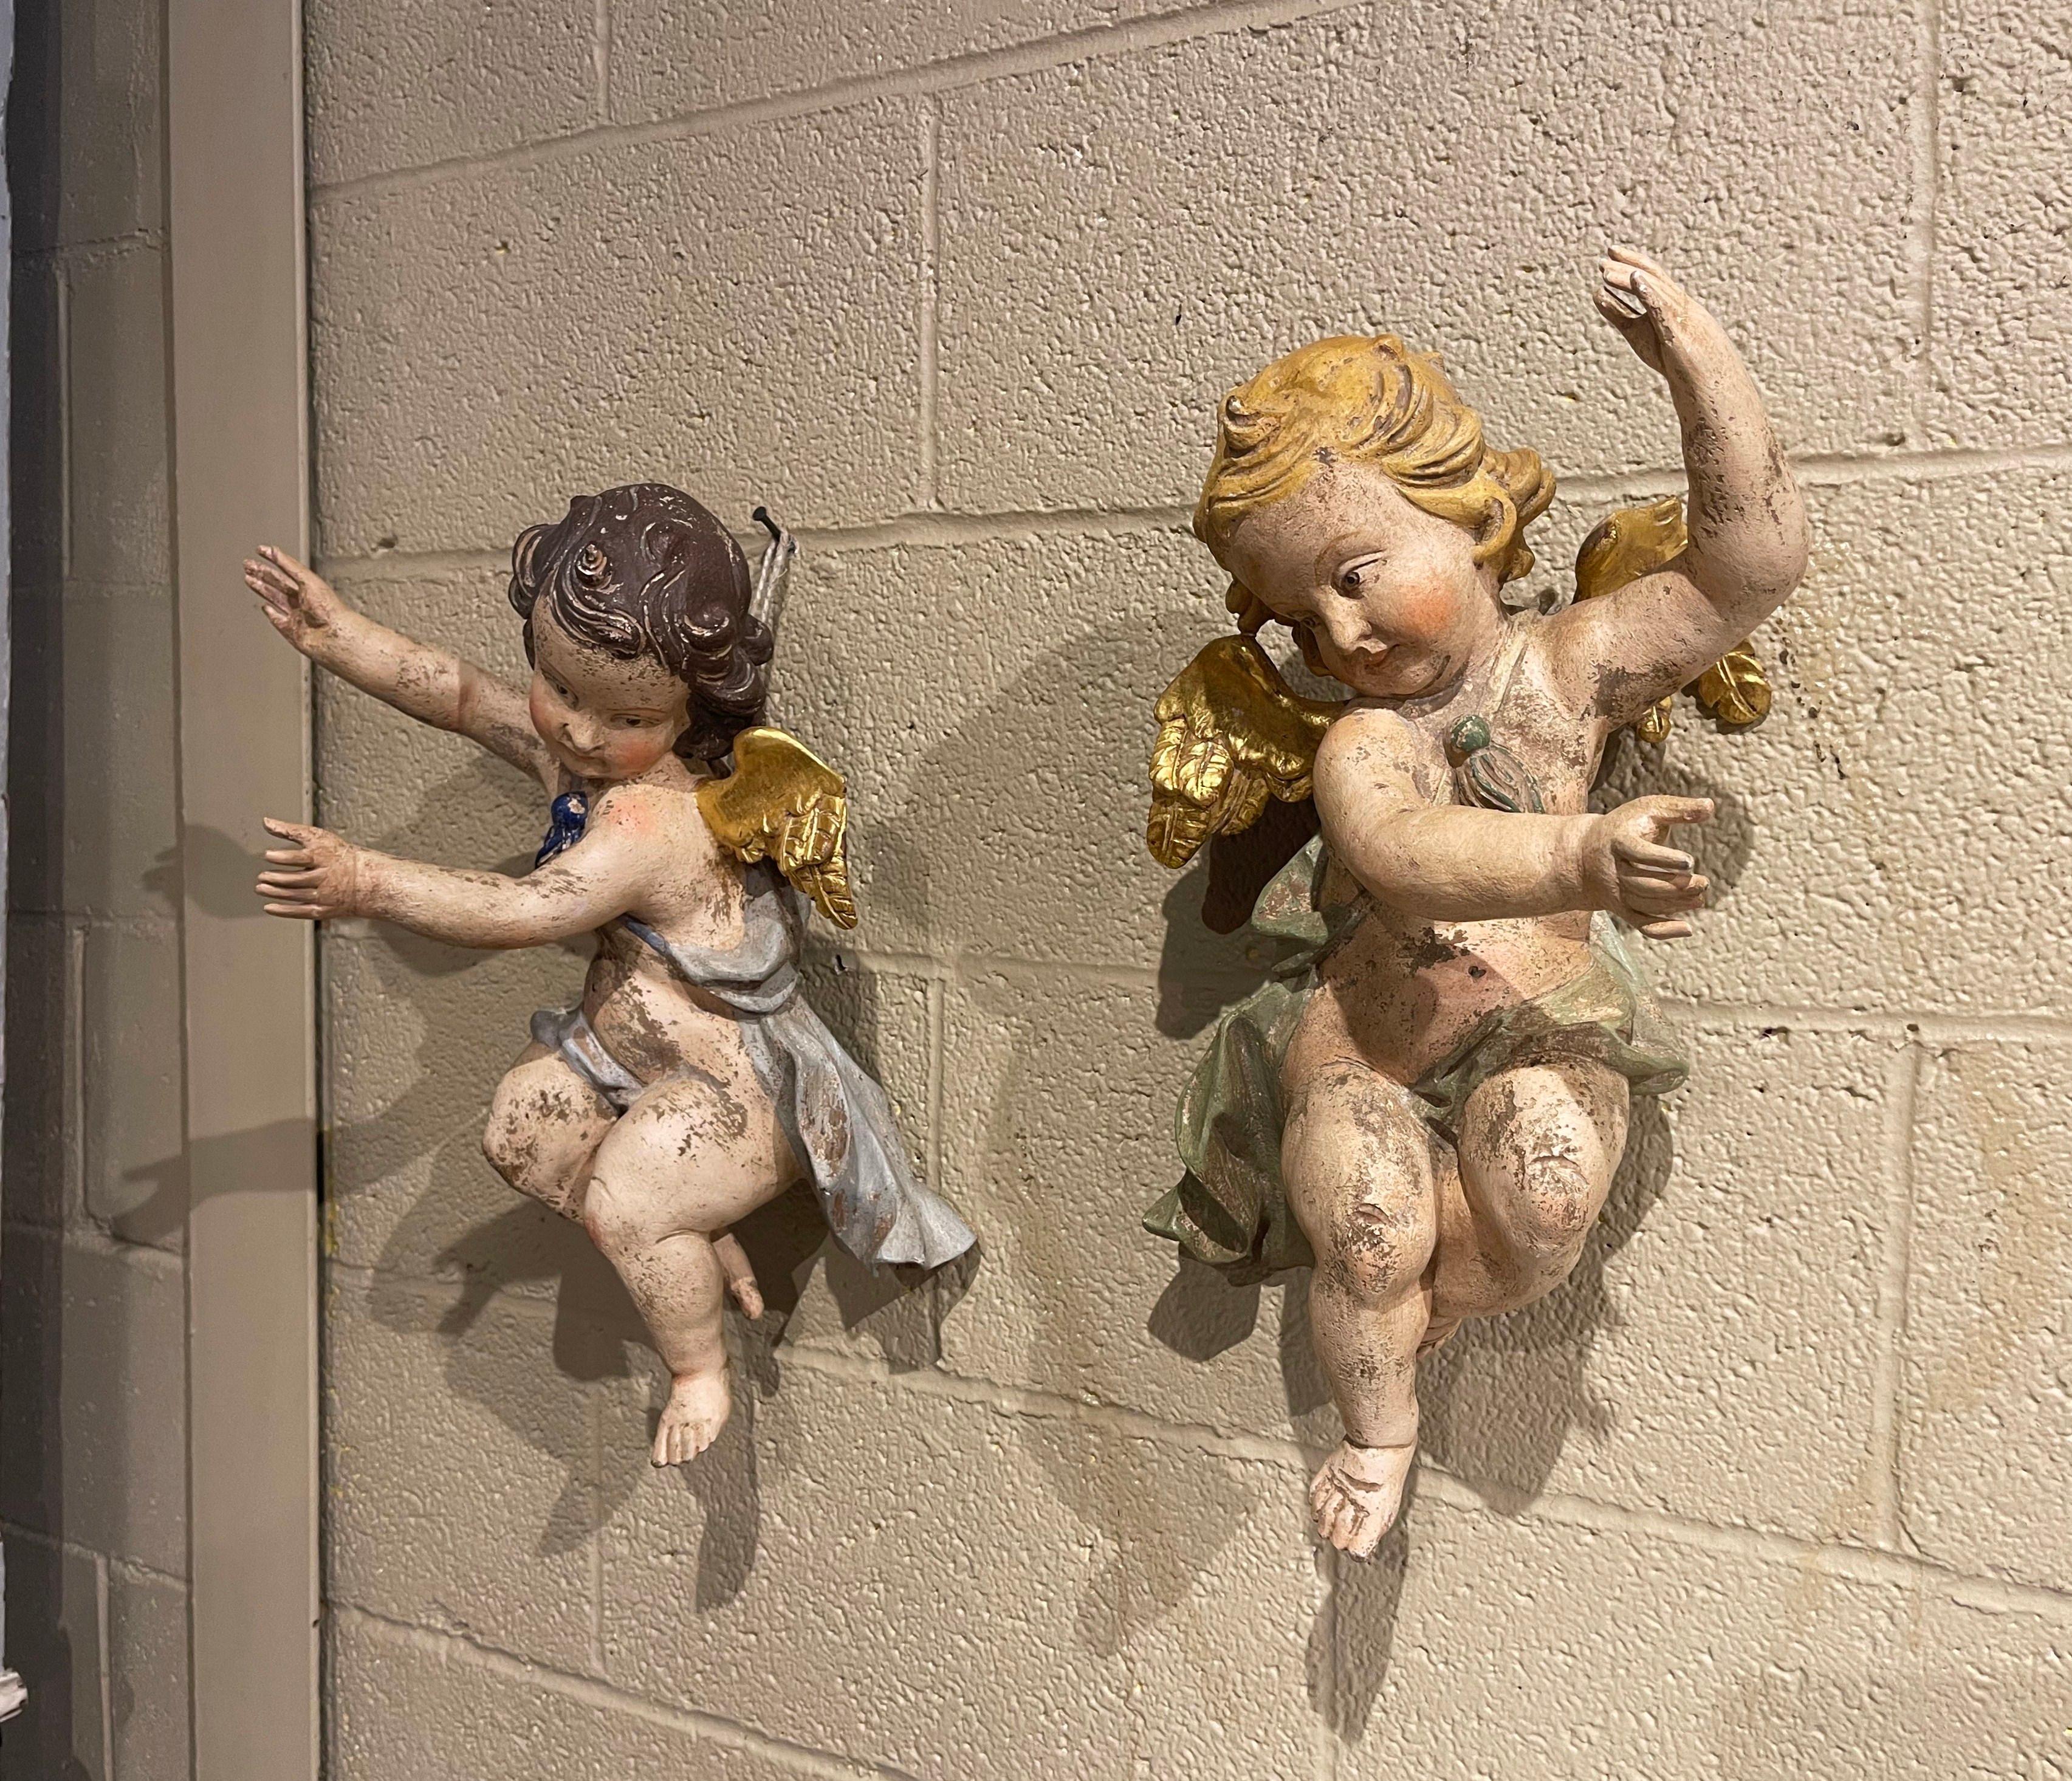 These hand carved winged cherub figures were crafted in Italy, circa 1880. The hand-painted putti carvings feature their original polychrome and gold leaf finish for a luxurious result. The colorful cherubs are expressive in their movement and